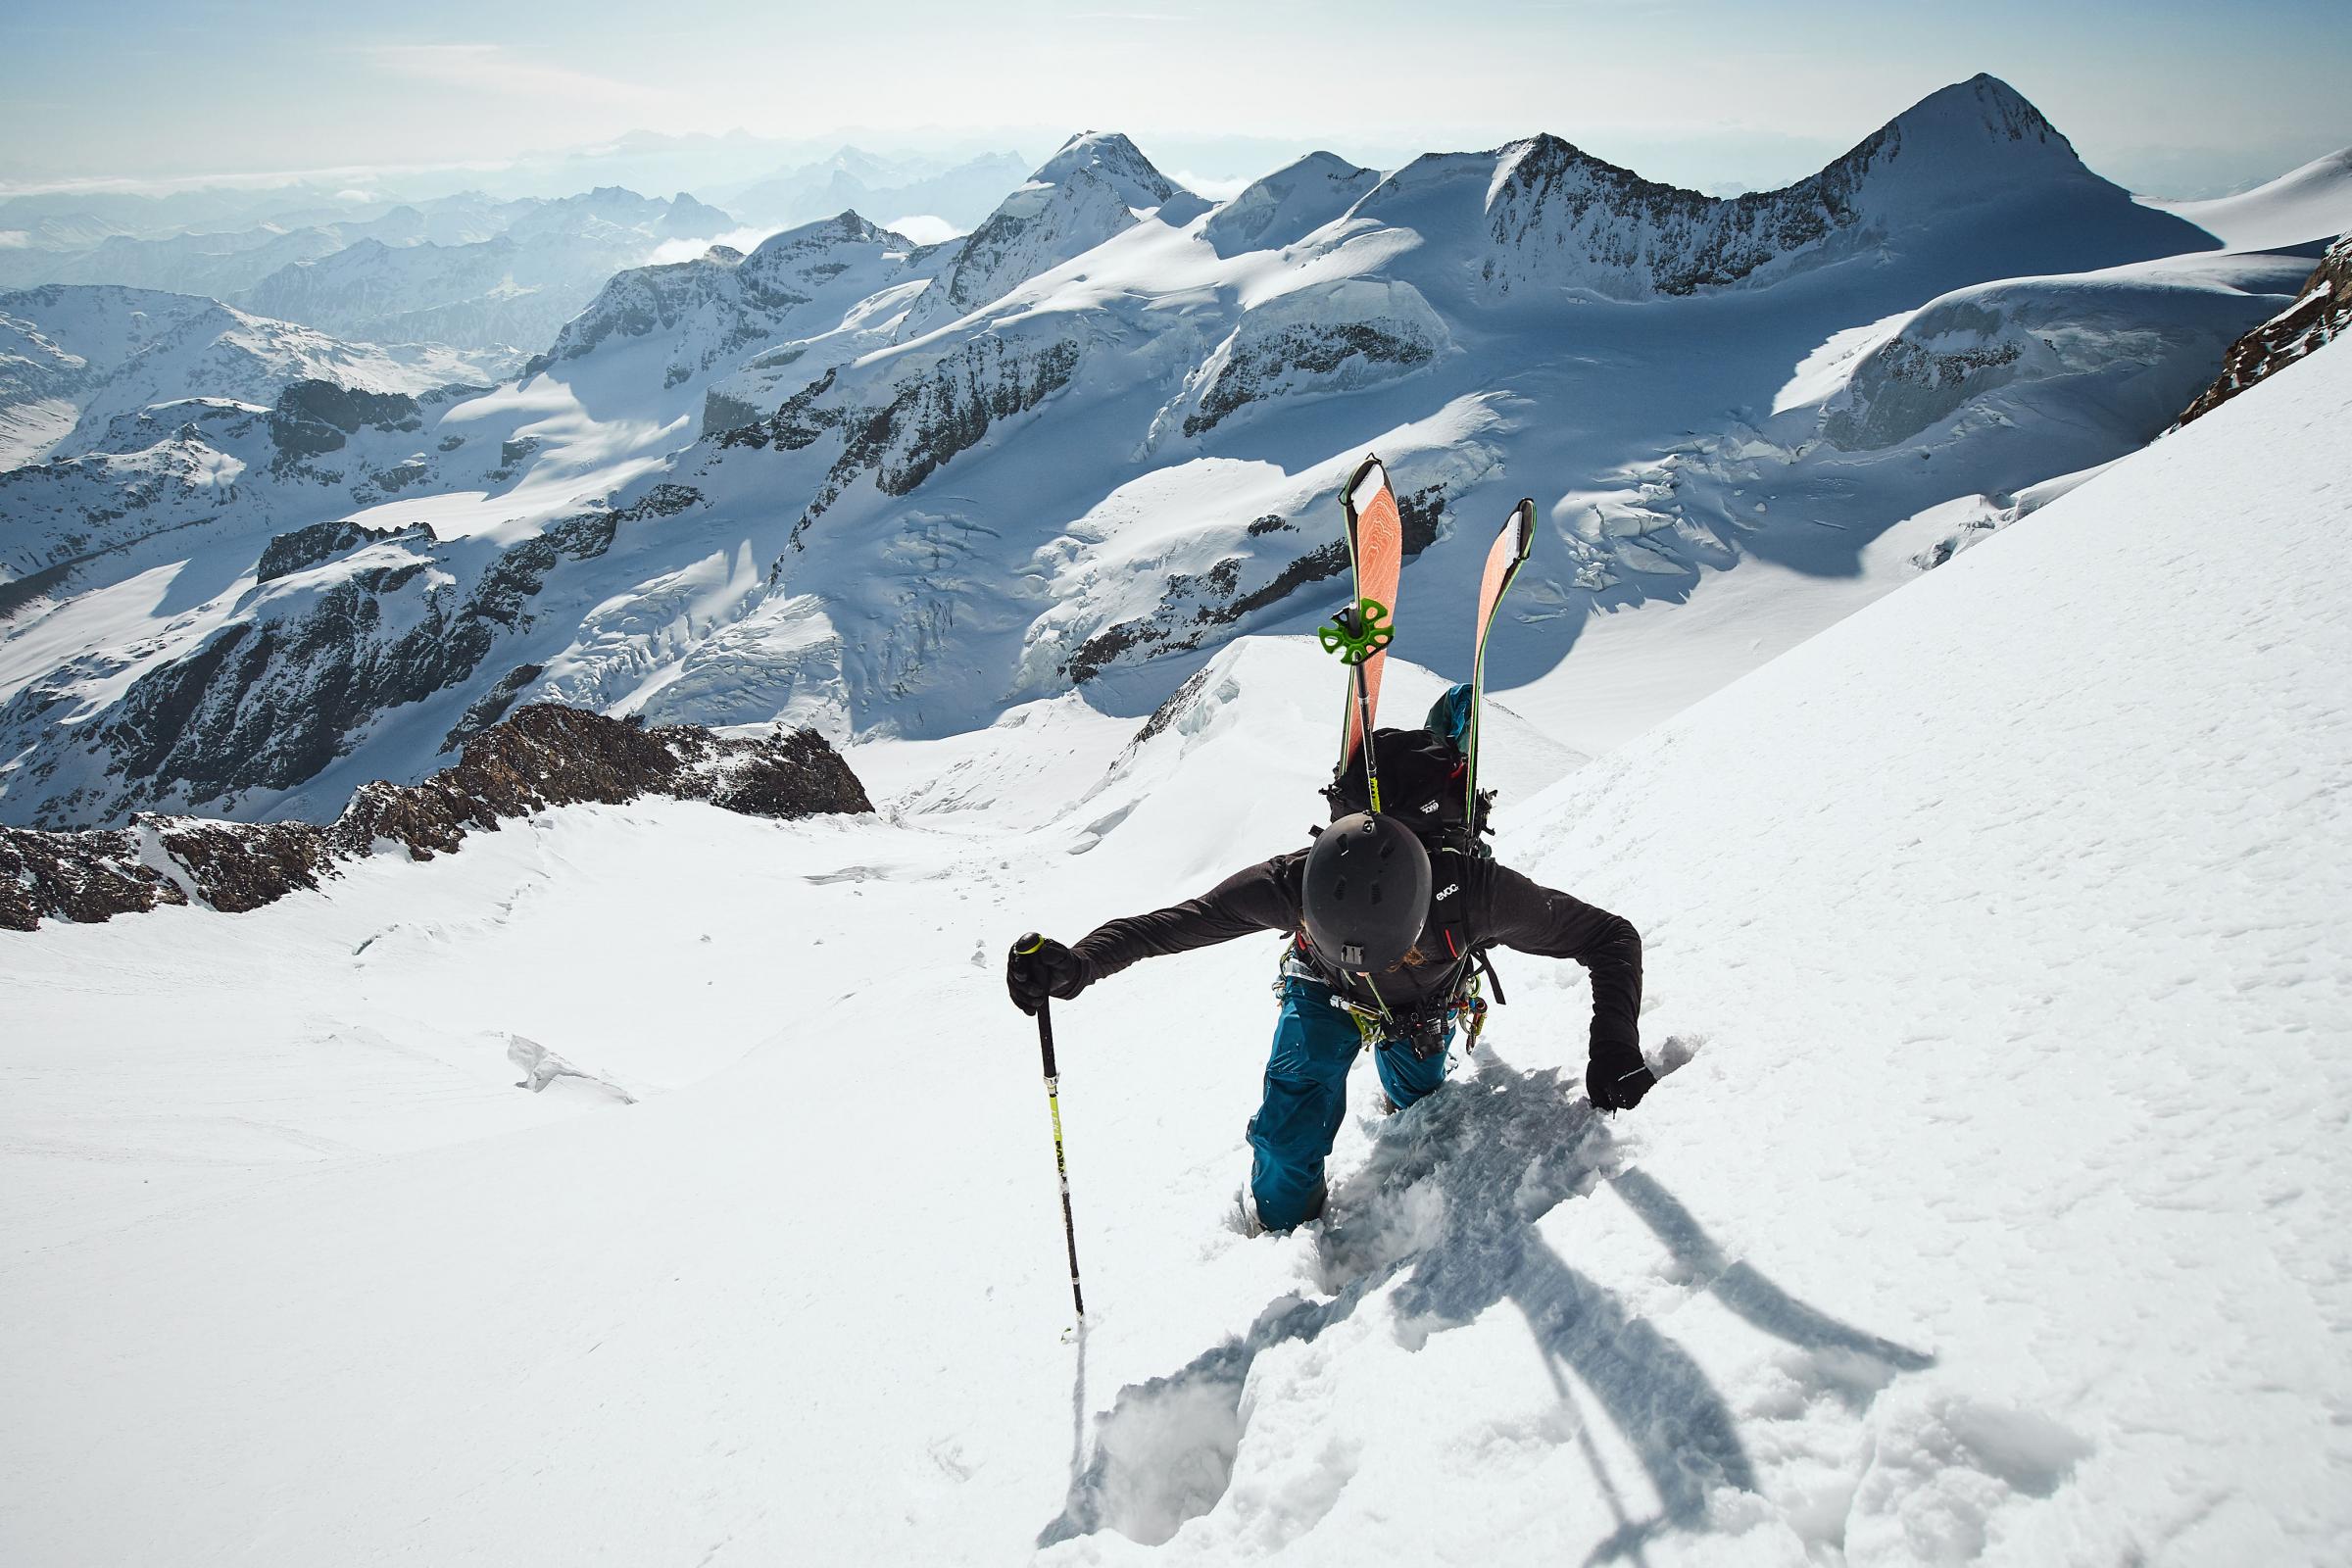 Adrenaline-packed mountain film festival heads to the region